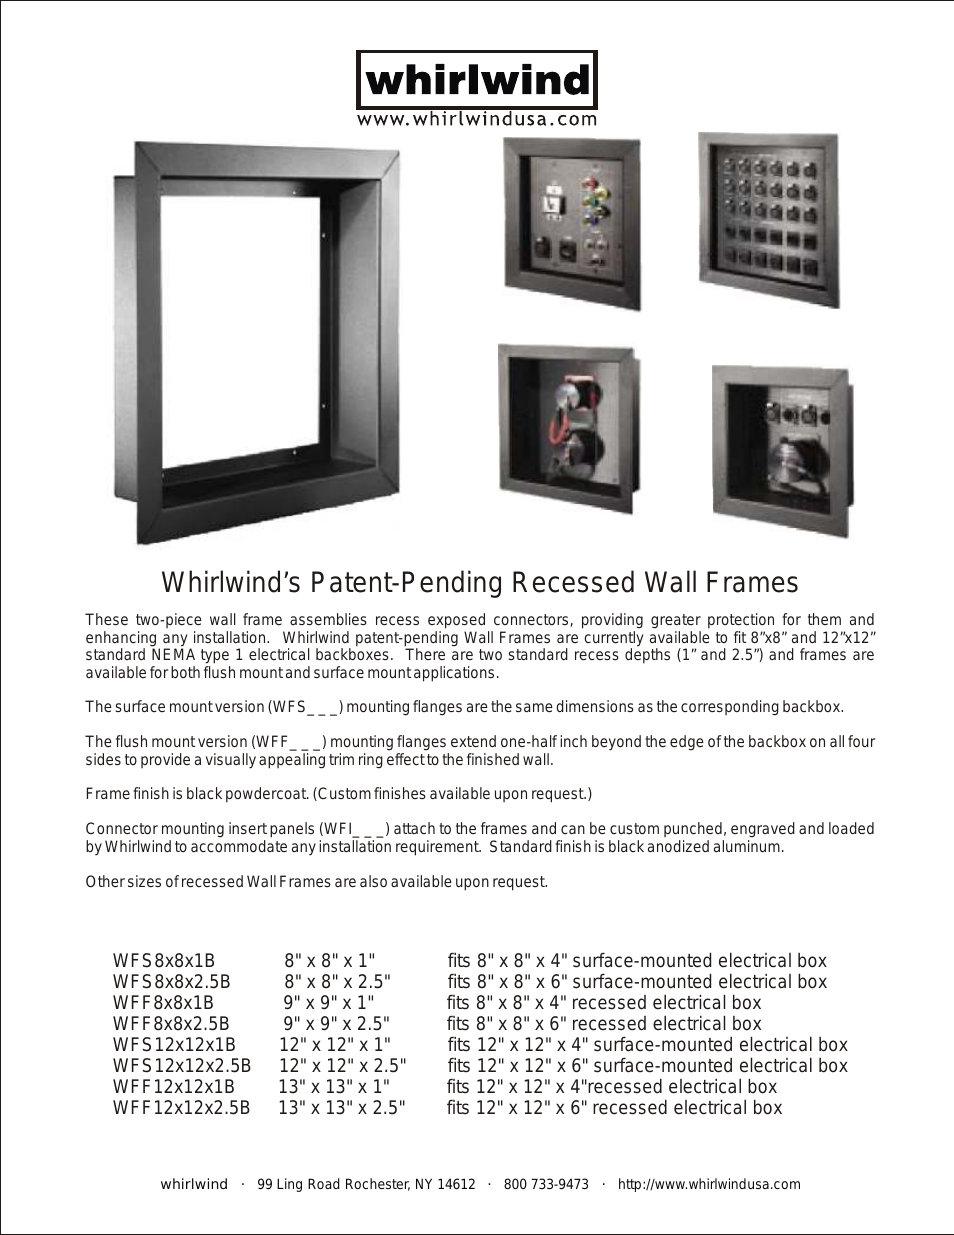 Patent-Pending Recessed Wall Frames